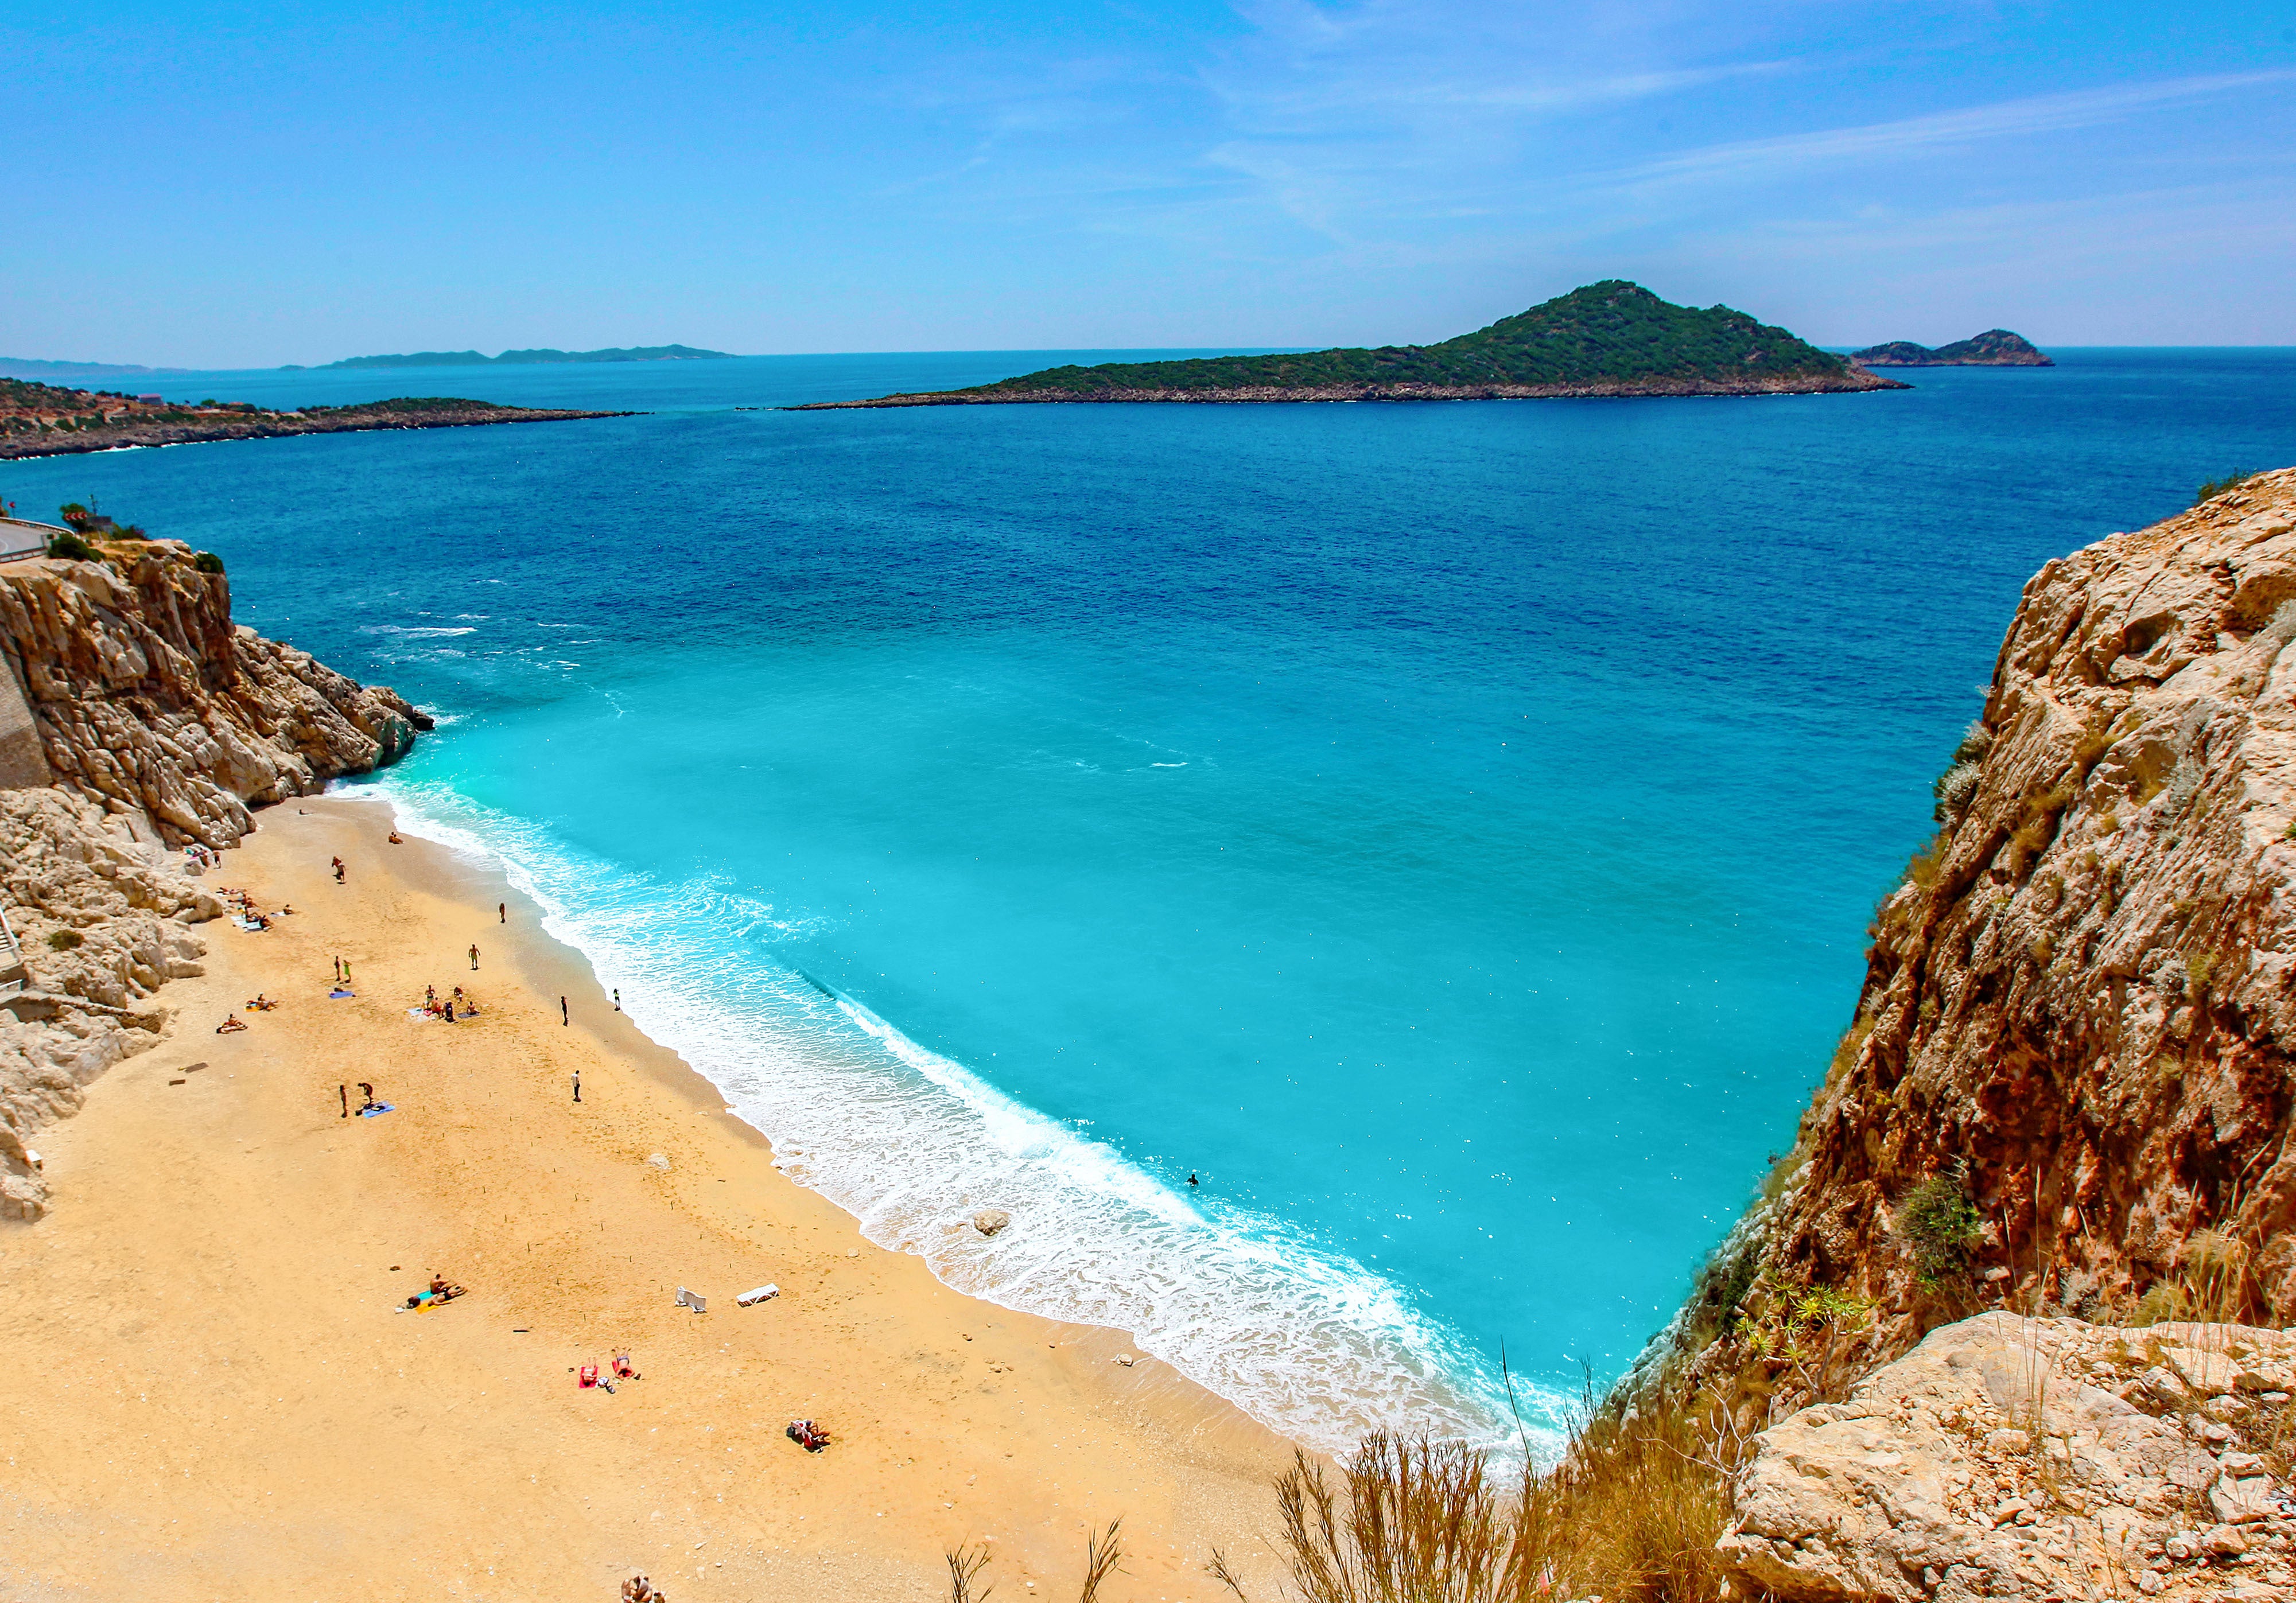 Flanked by crags, the golden sands and crystalline waters of Kaputaş Beach are a must-experience